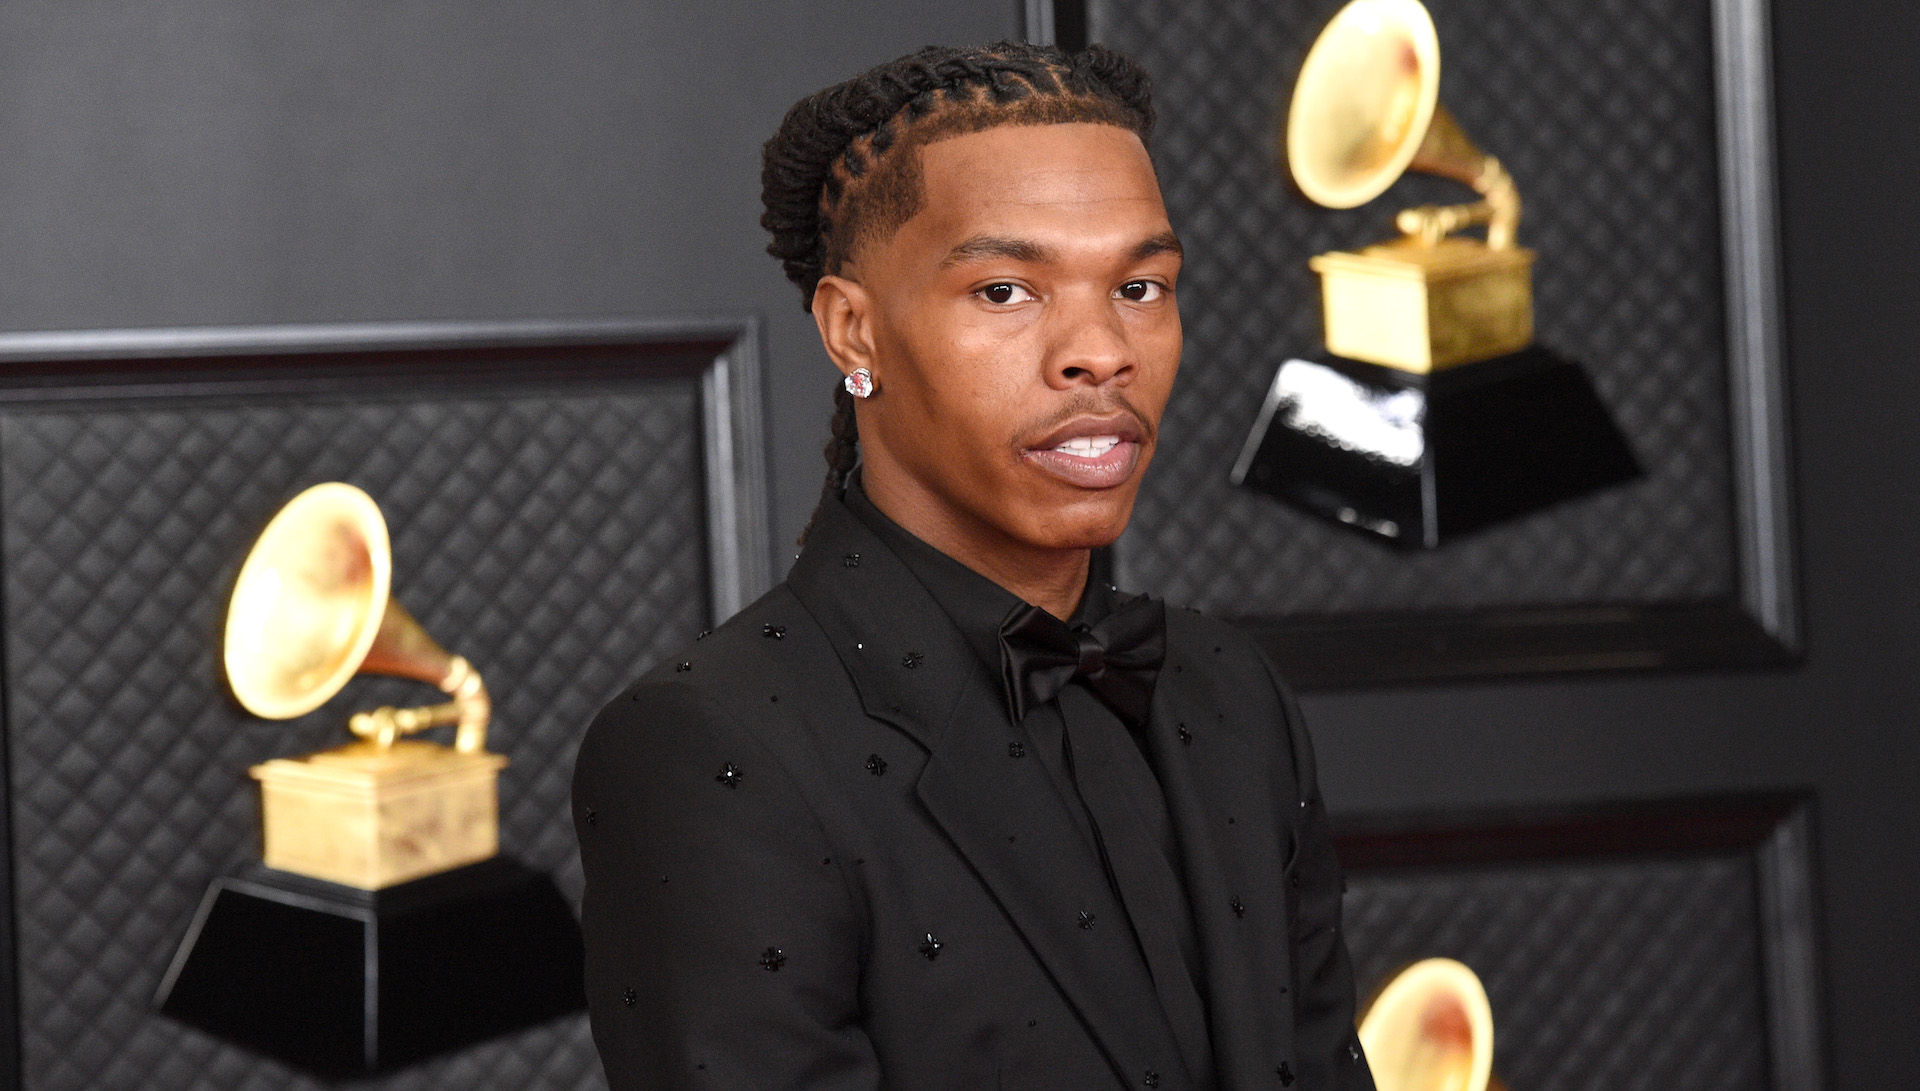 Lil Baby Crowns Himself the 'Wayne of This New Generation' on EST 